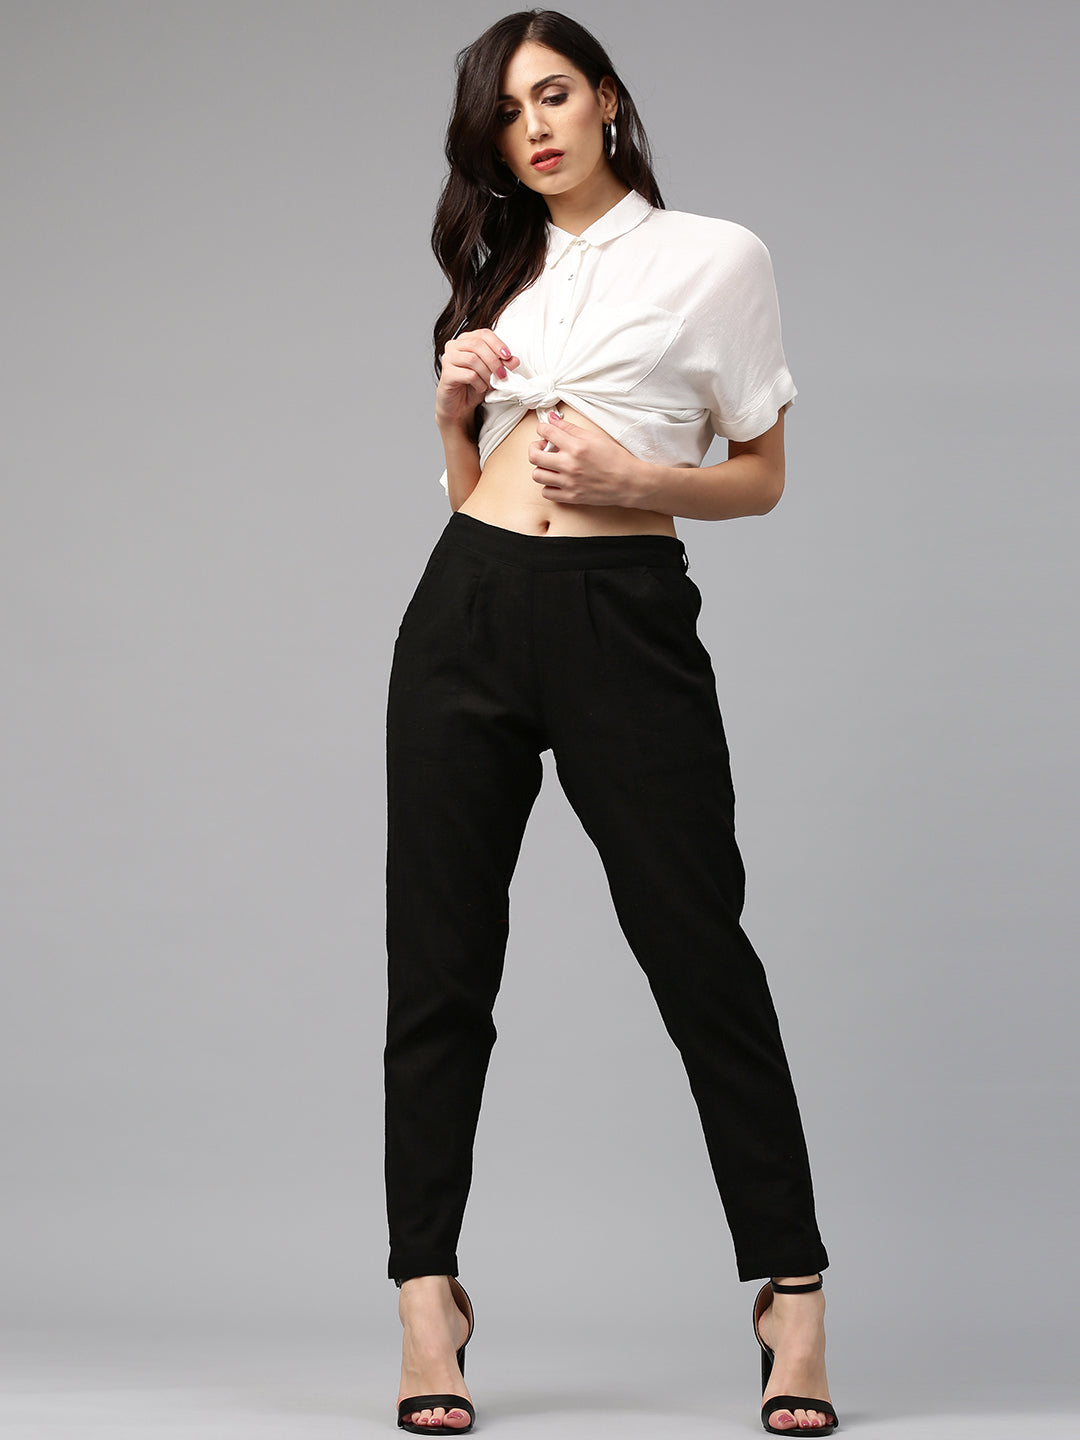 Trousers - Buy branded Trousers online cotton, polyester, casual wear, work  wear, party wear, Trousers for Women at Limeroad. | page 2